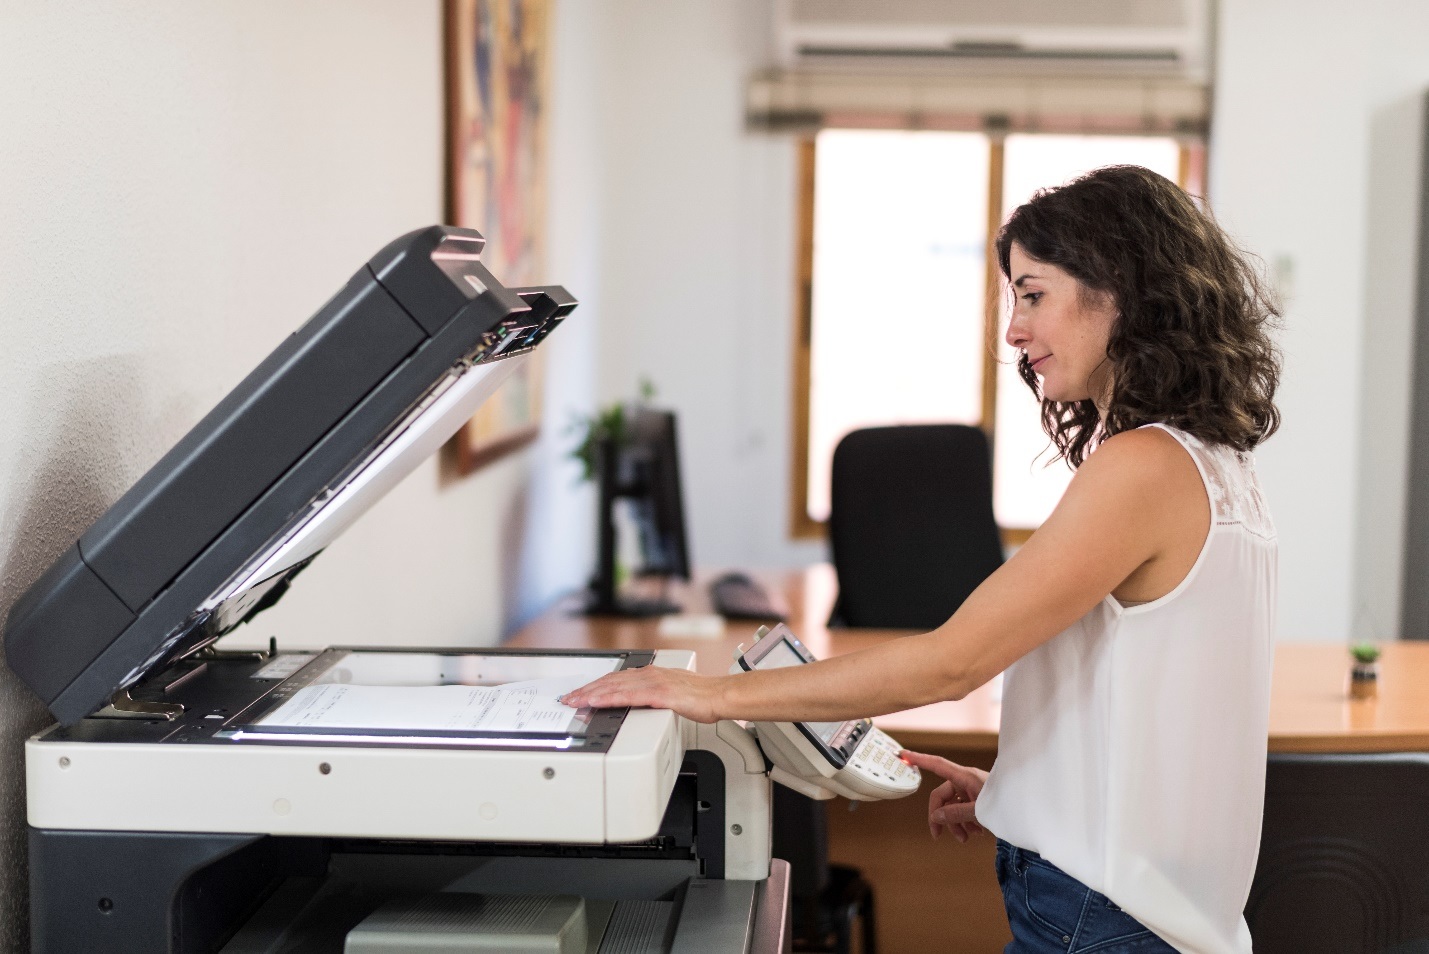 How Copiers Changed Work Productivity